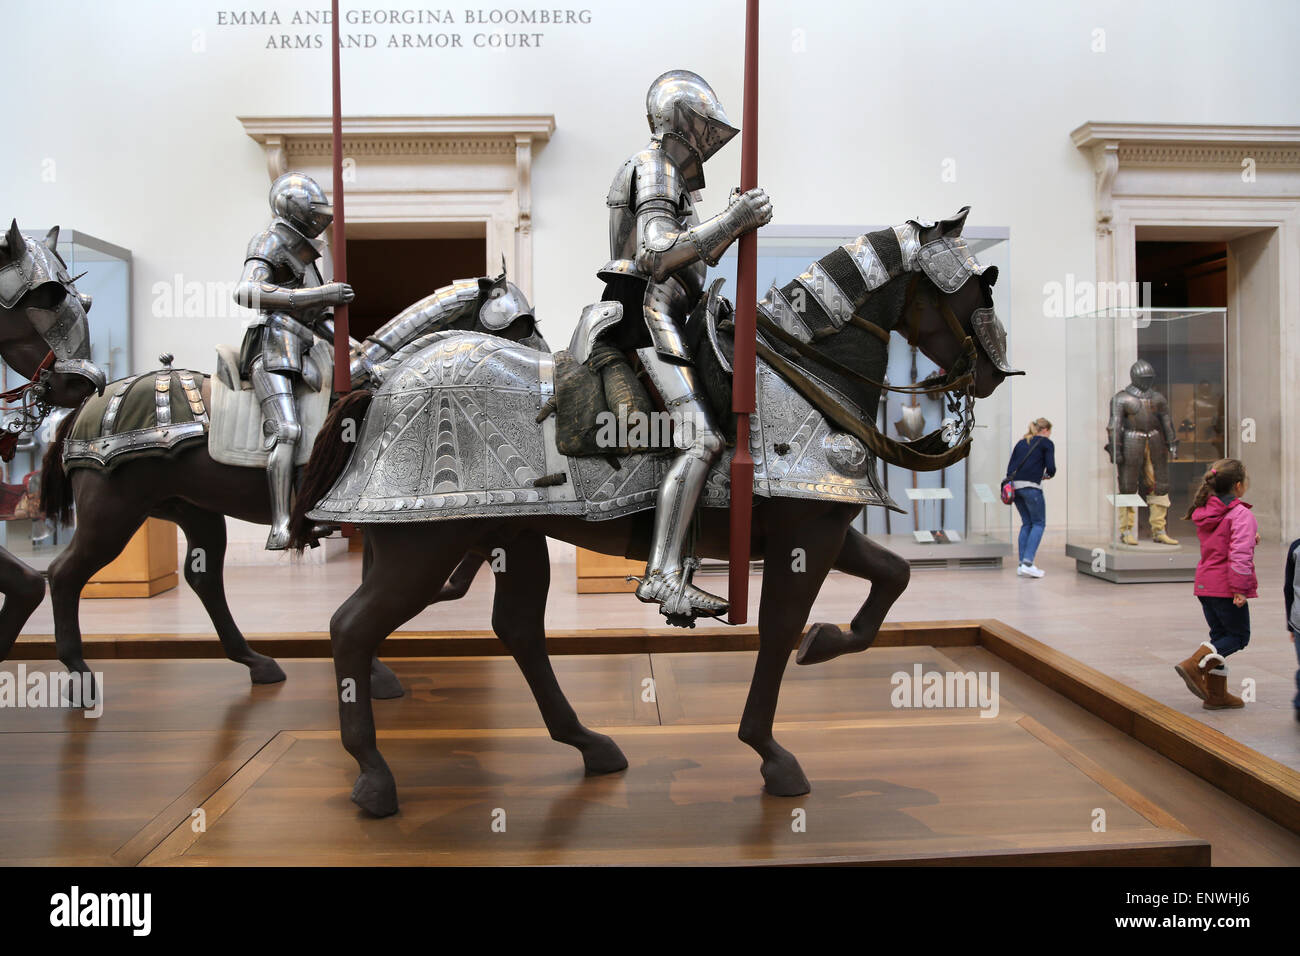 Armor for Man (1575) and Horse (1650). Steel, etched and partly gilt; leather, cooper alloy, textile. From Italy. Stock Photo